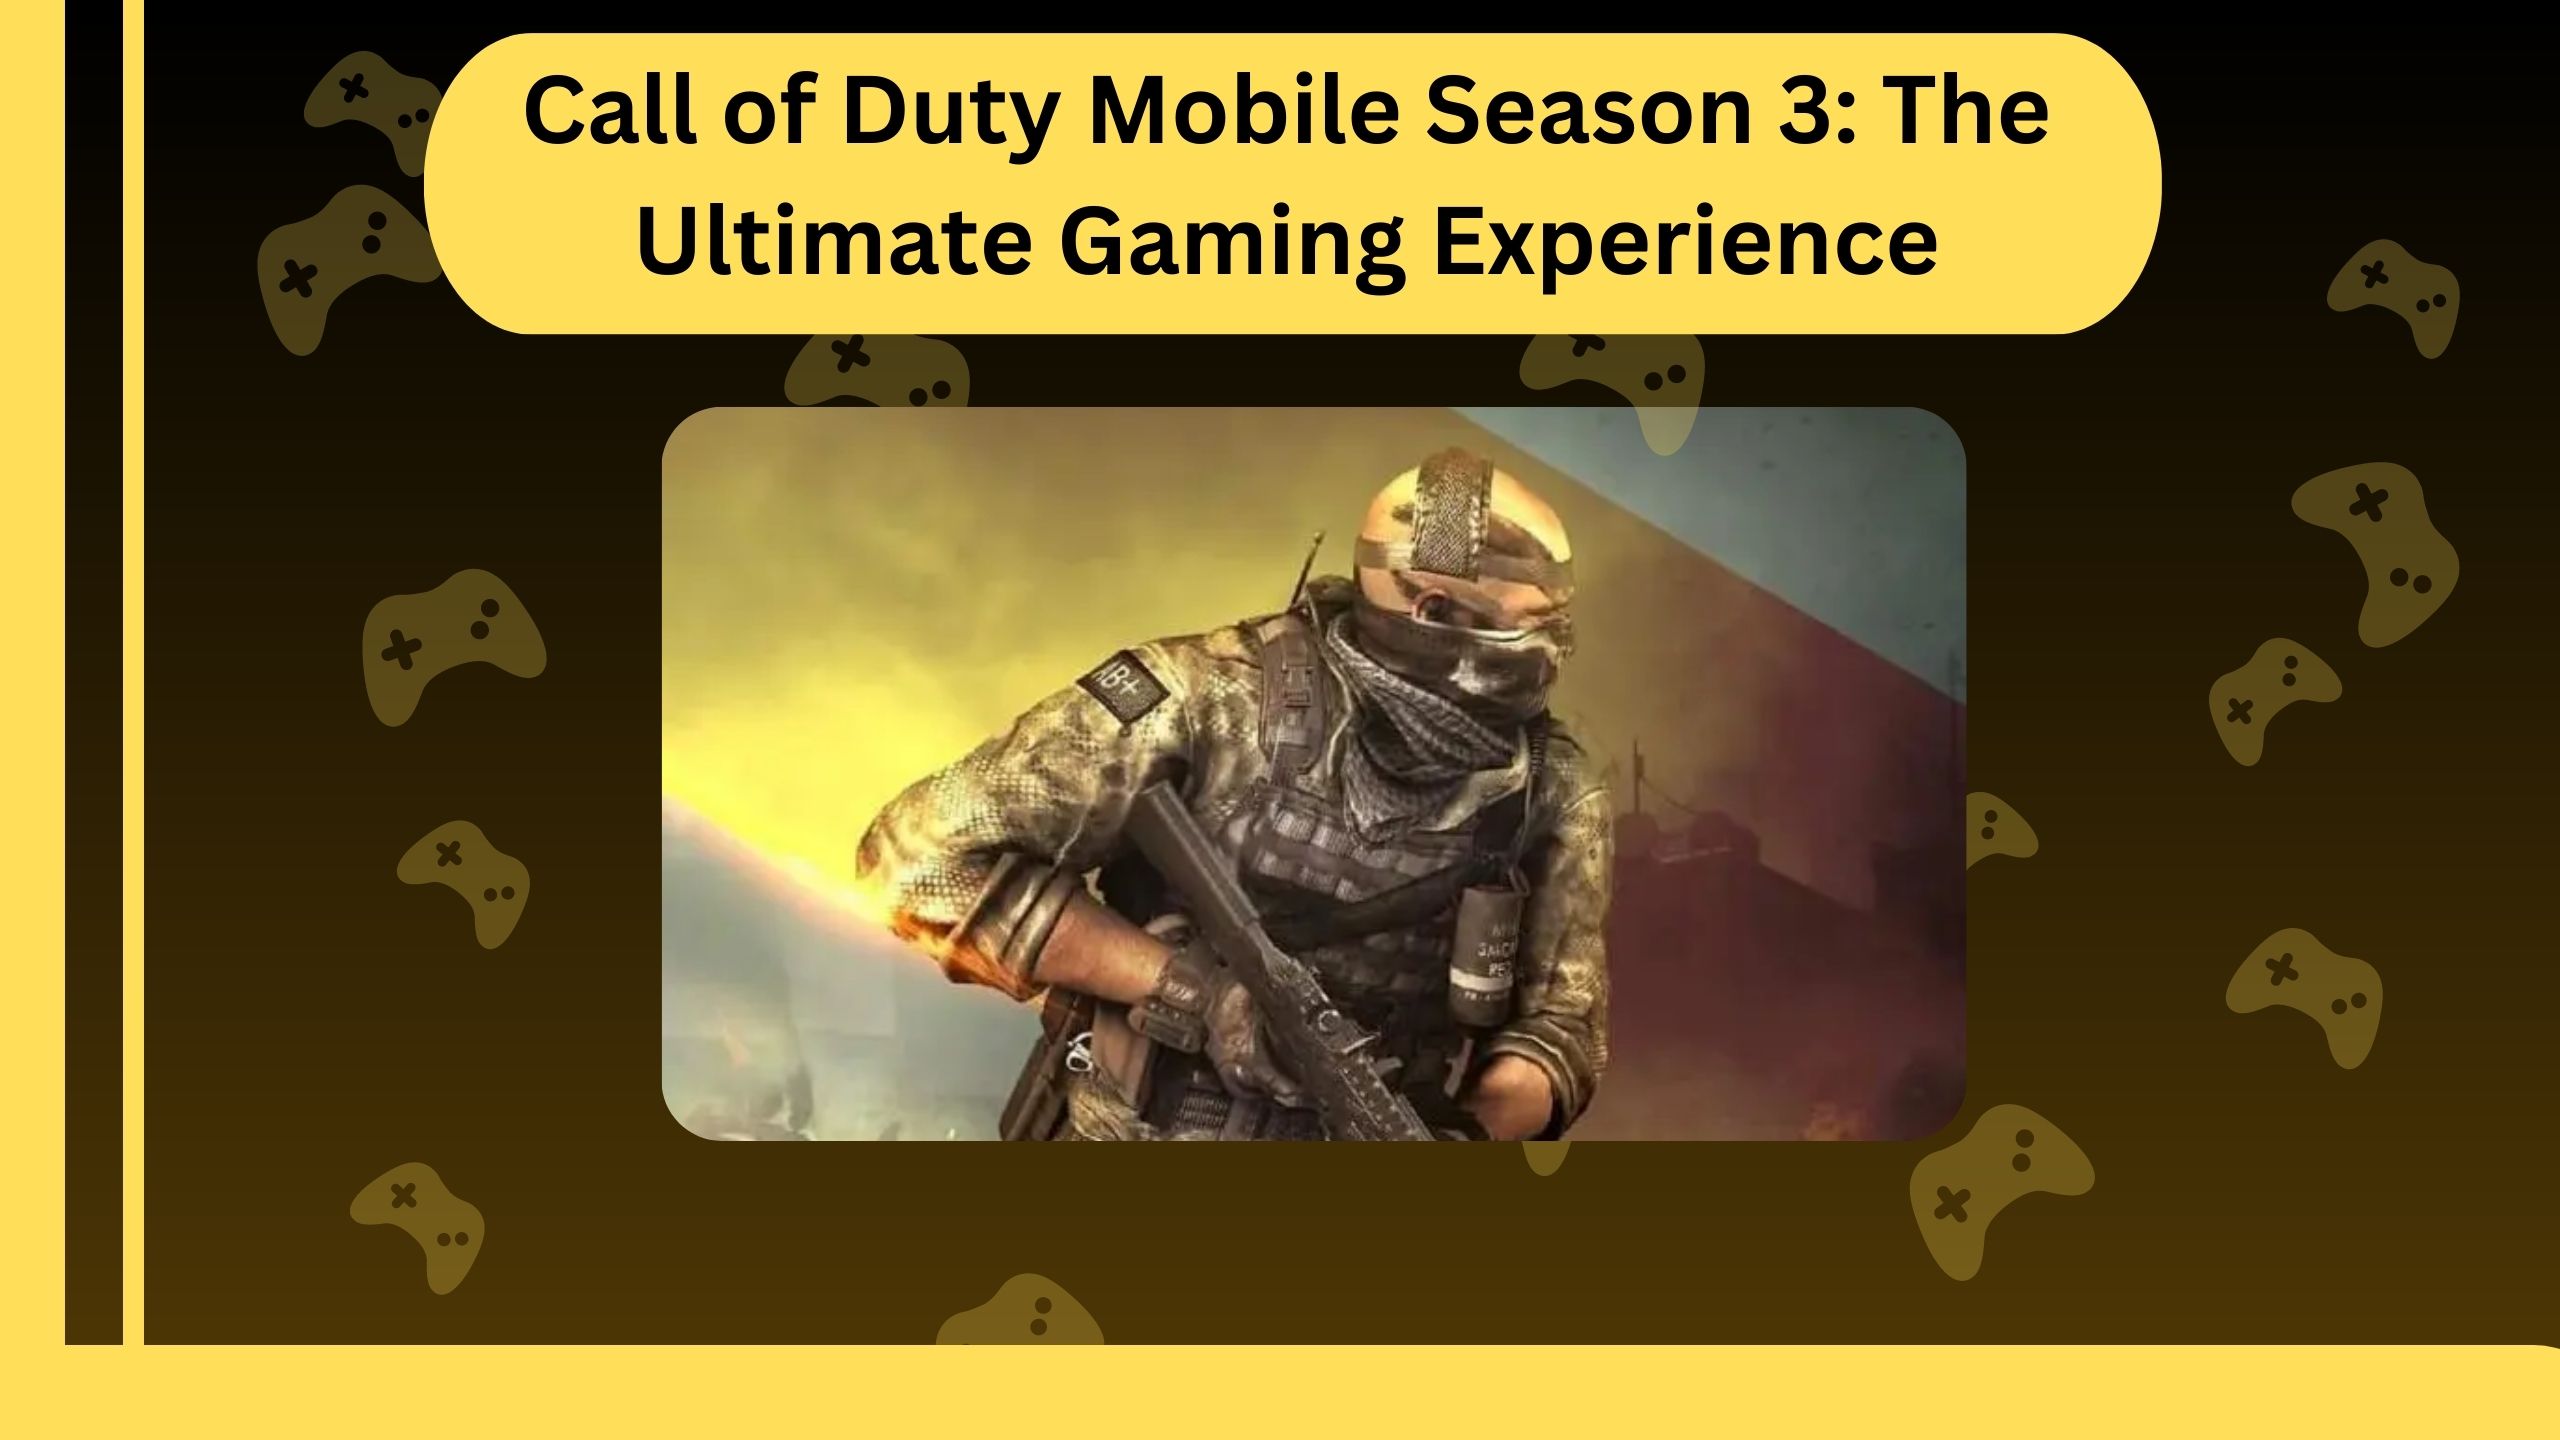 Call of Duty Mobile Season 3 The Ultimate Gaming Experience